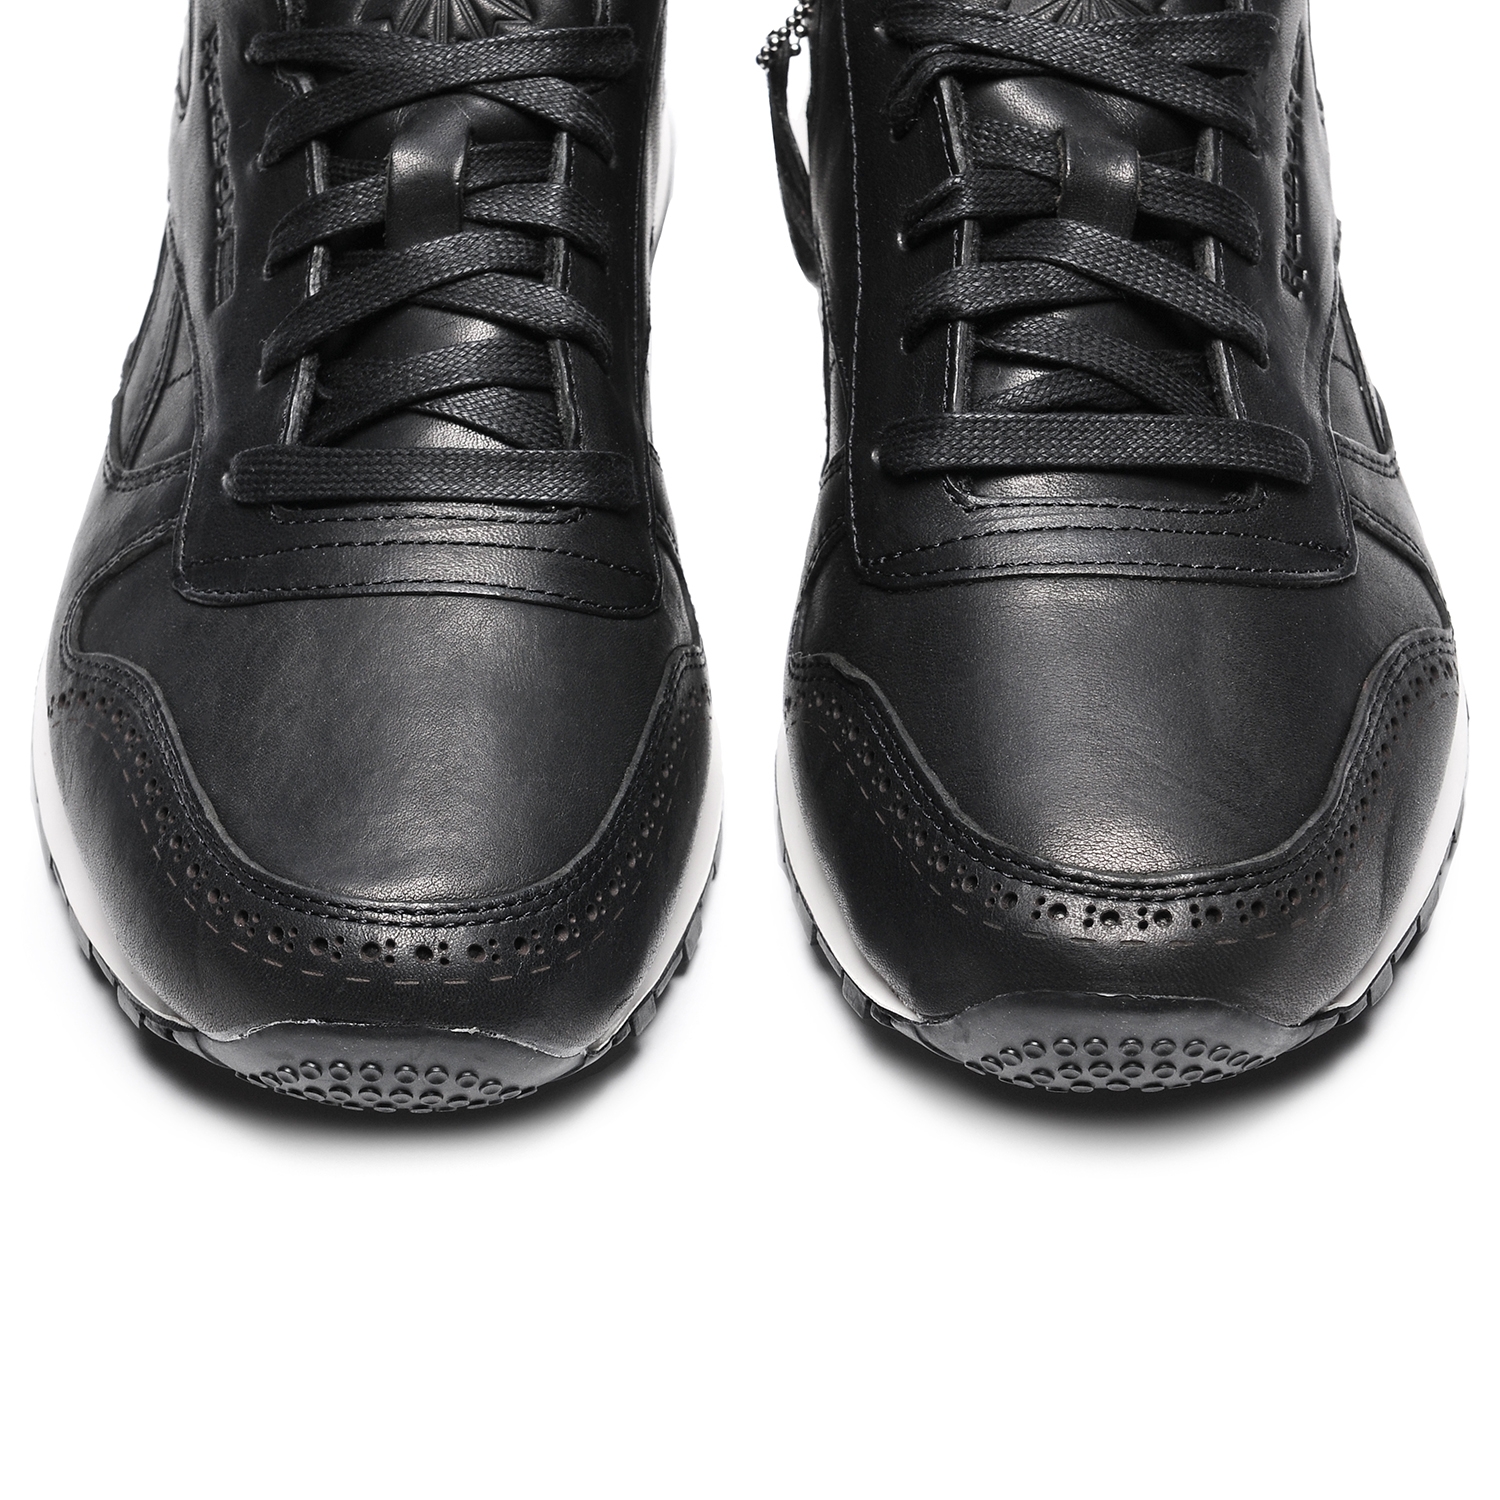 Classic Leather Lux Horween Black/White